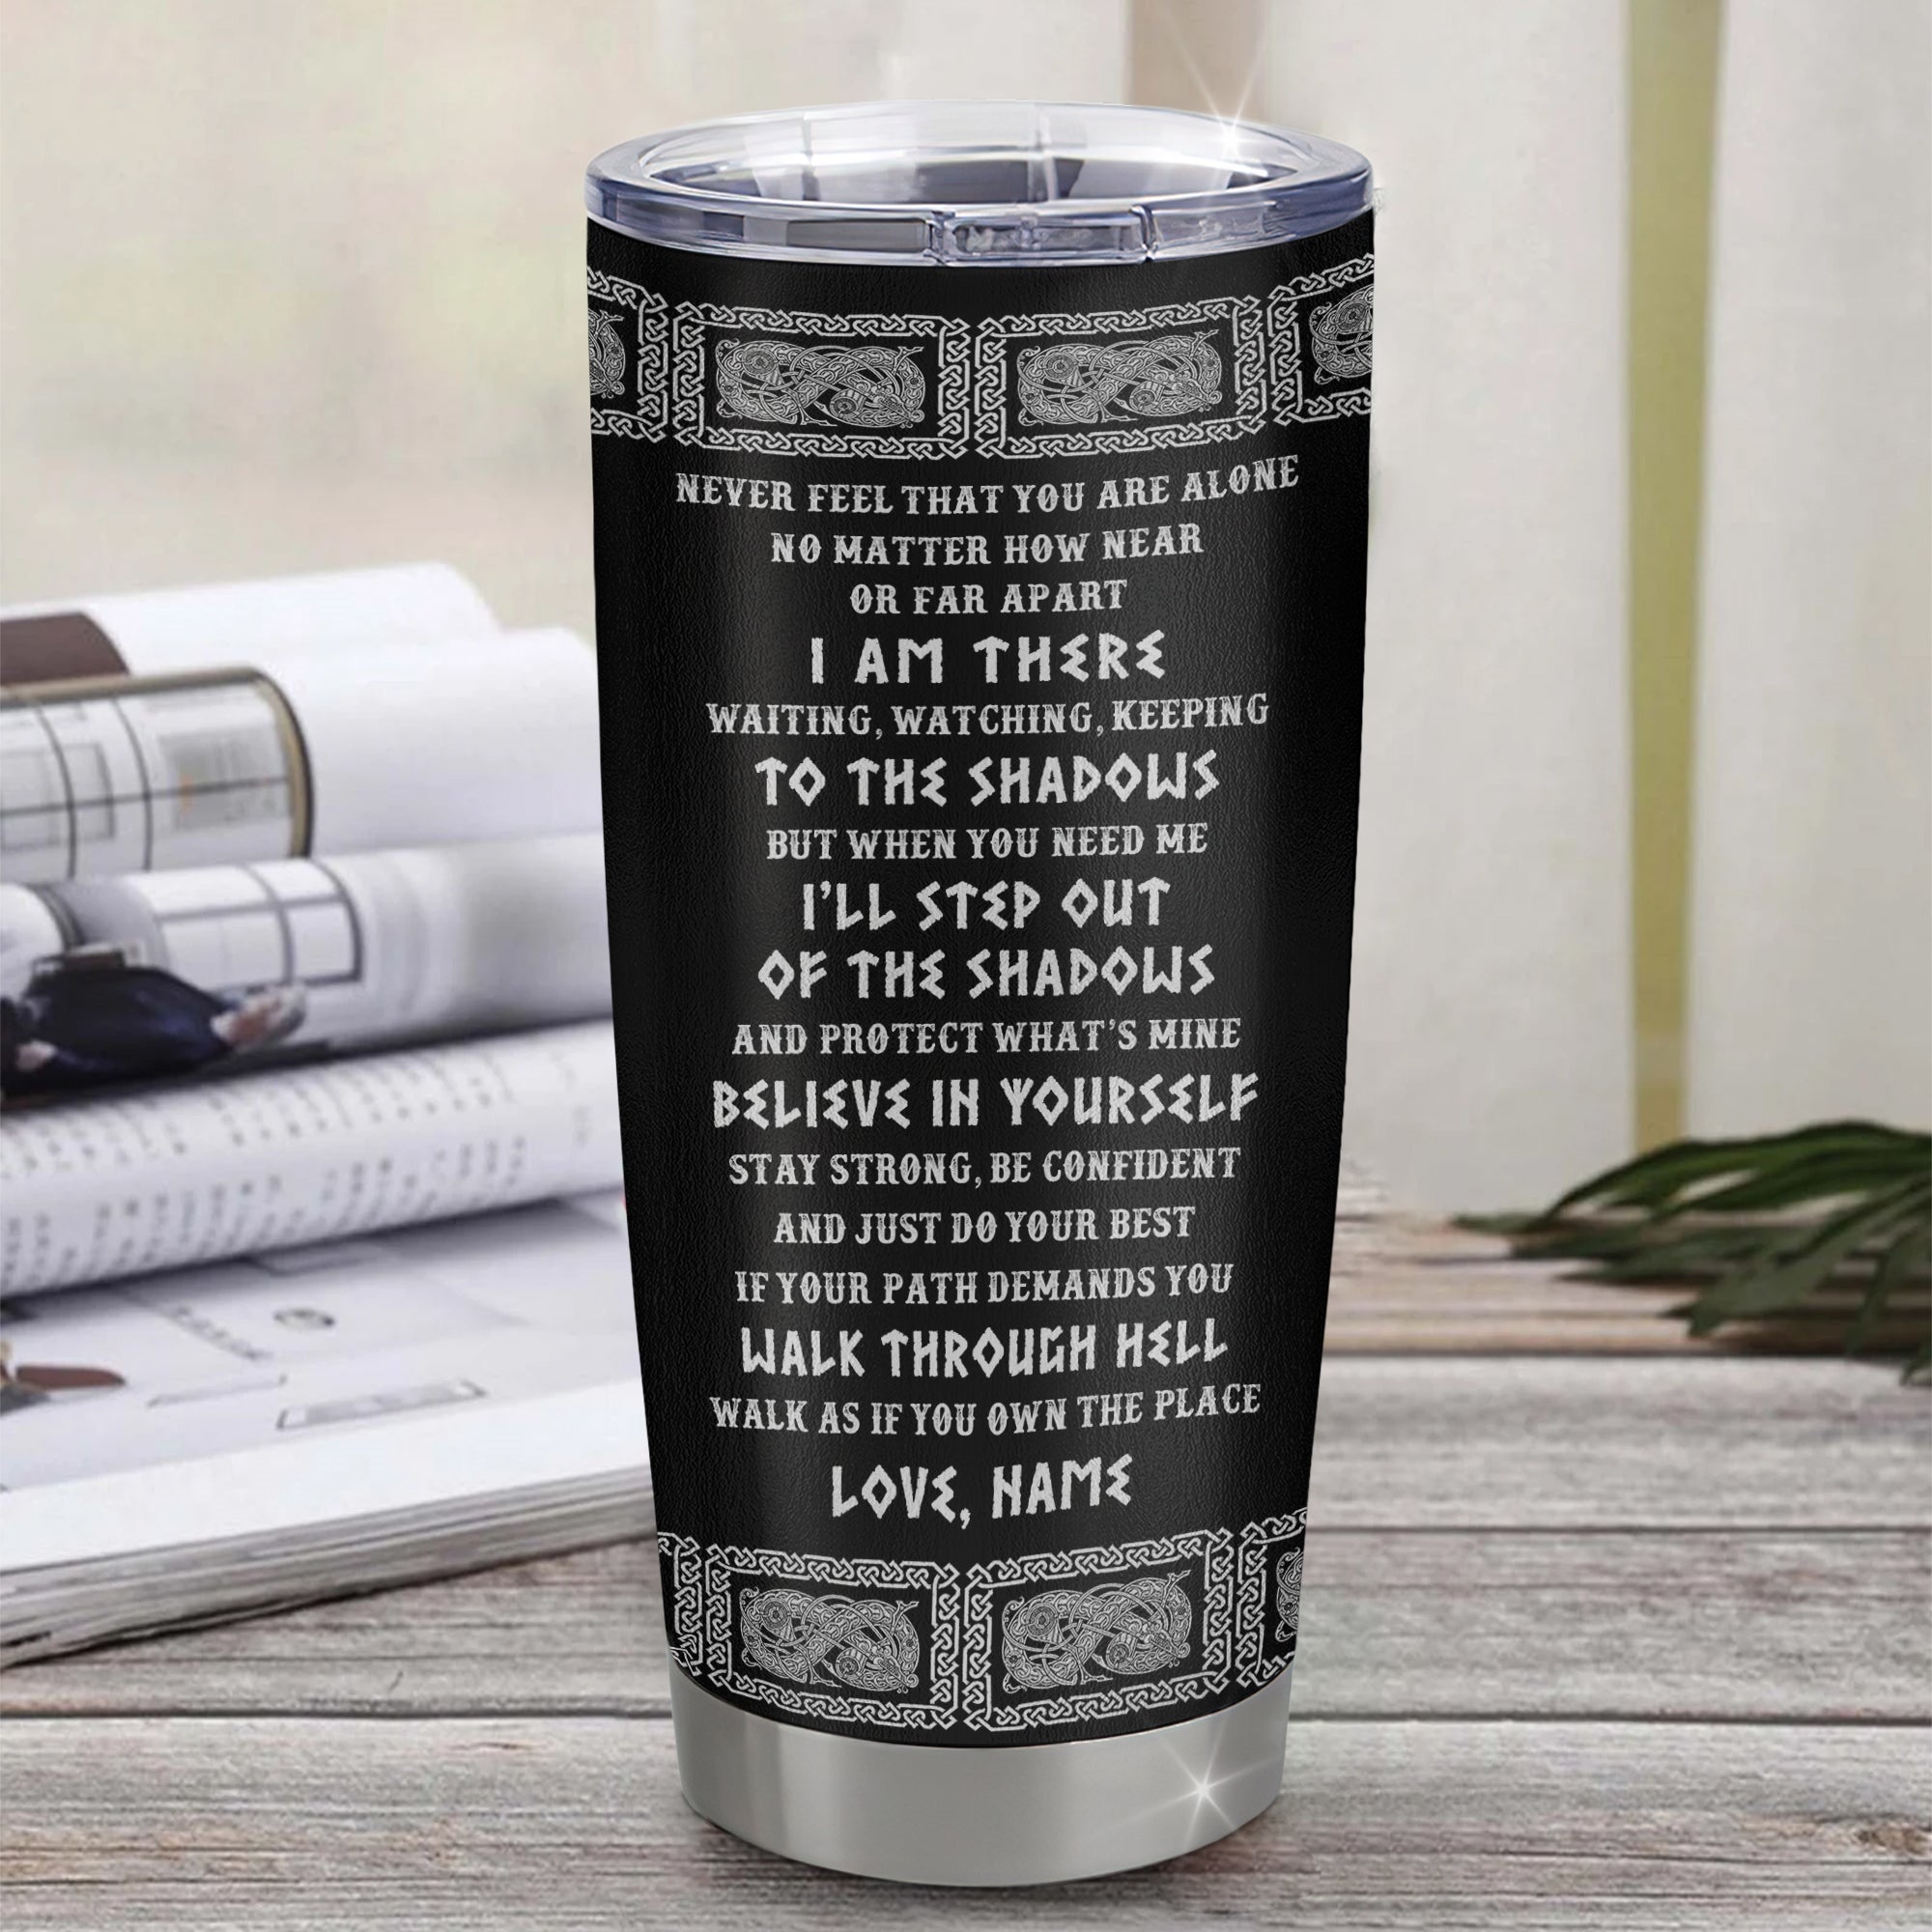 Personalized_To_My_Nephew_Viking_Stainless_Steel_Tumbler_Cup_Never_Feel_You_Are_Alone_Odin_Scandinavian_Norse_Runes_Daughter_Birthday_Christmas_Christmas_Travel_Mug_Tumbler_mockup_1.jpg